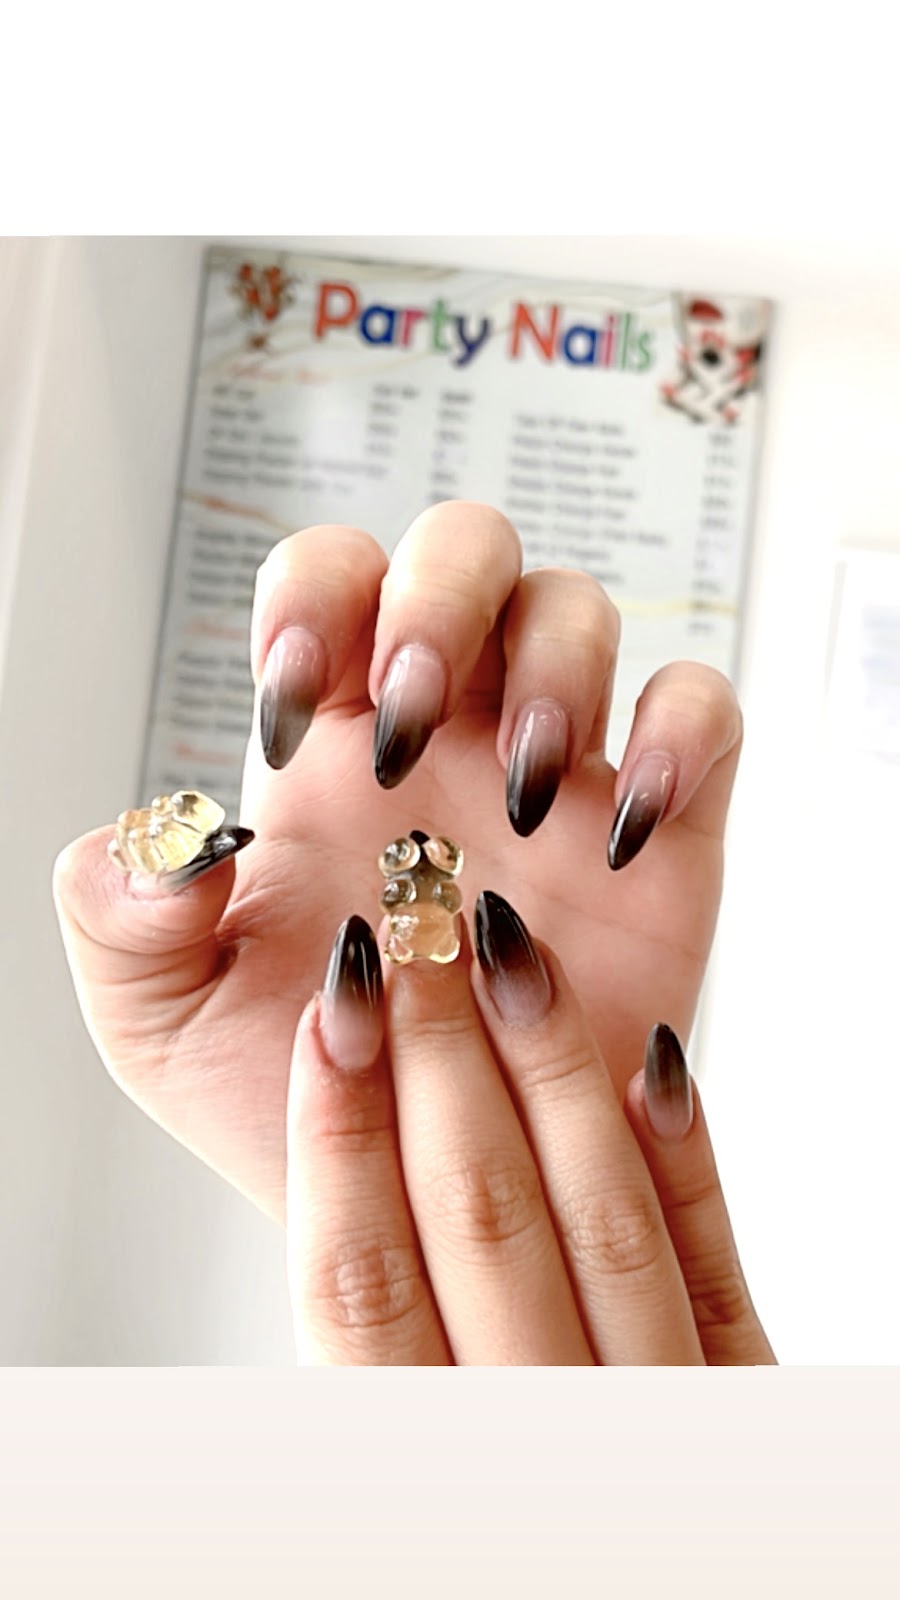 Party Nails | 715 Wellington St W, Guelph, ON N1H 8L8, Canada | Phone: (519) 821-4543